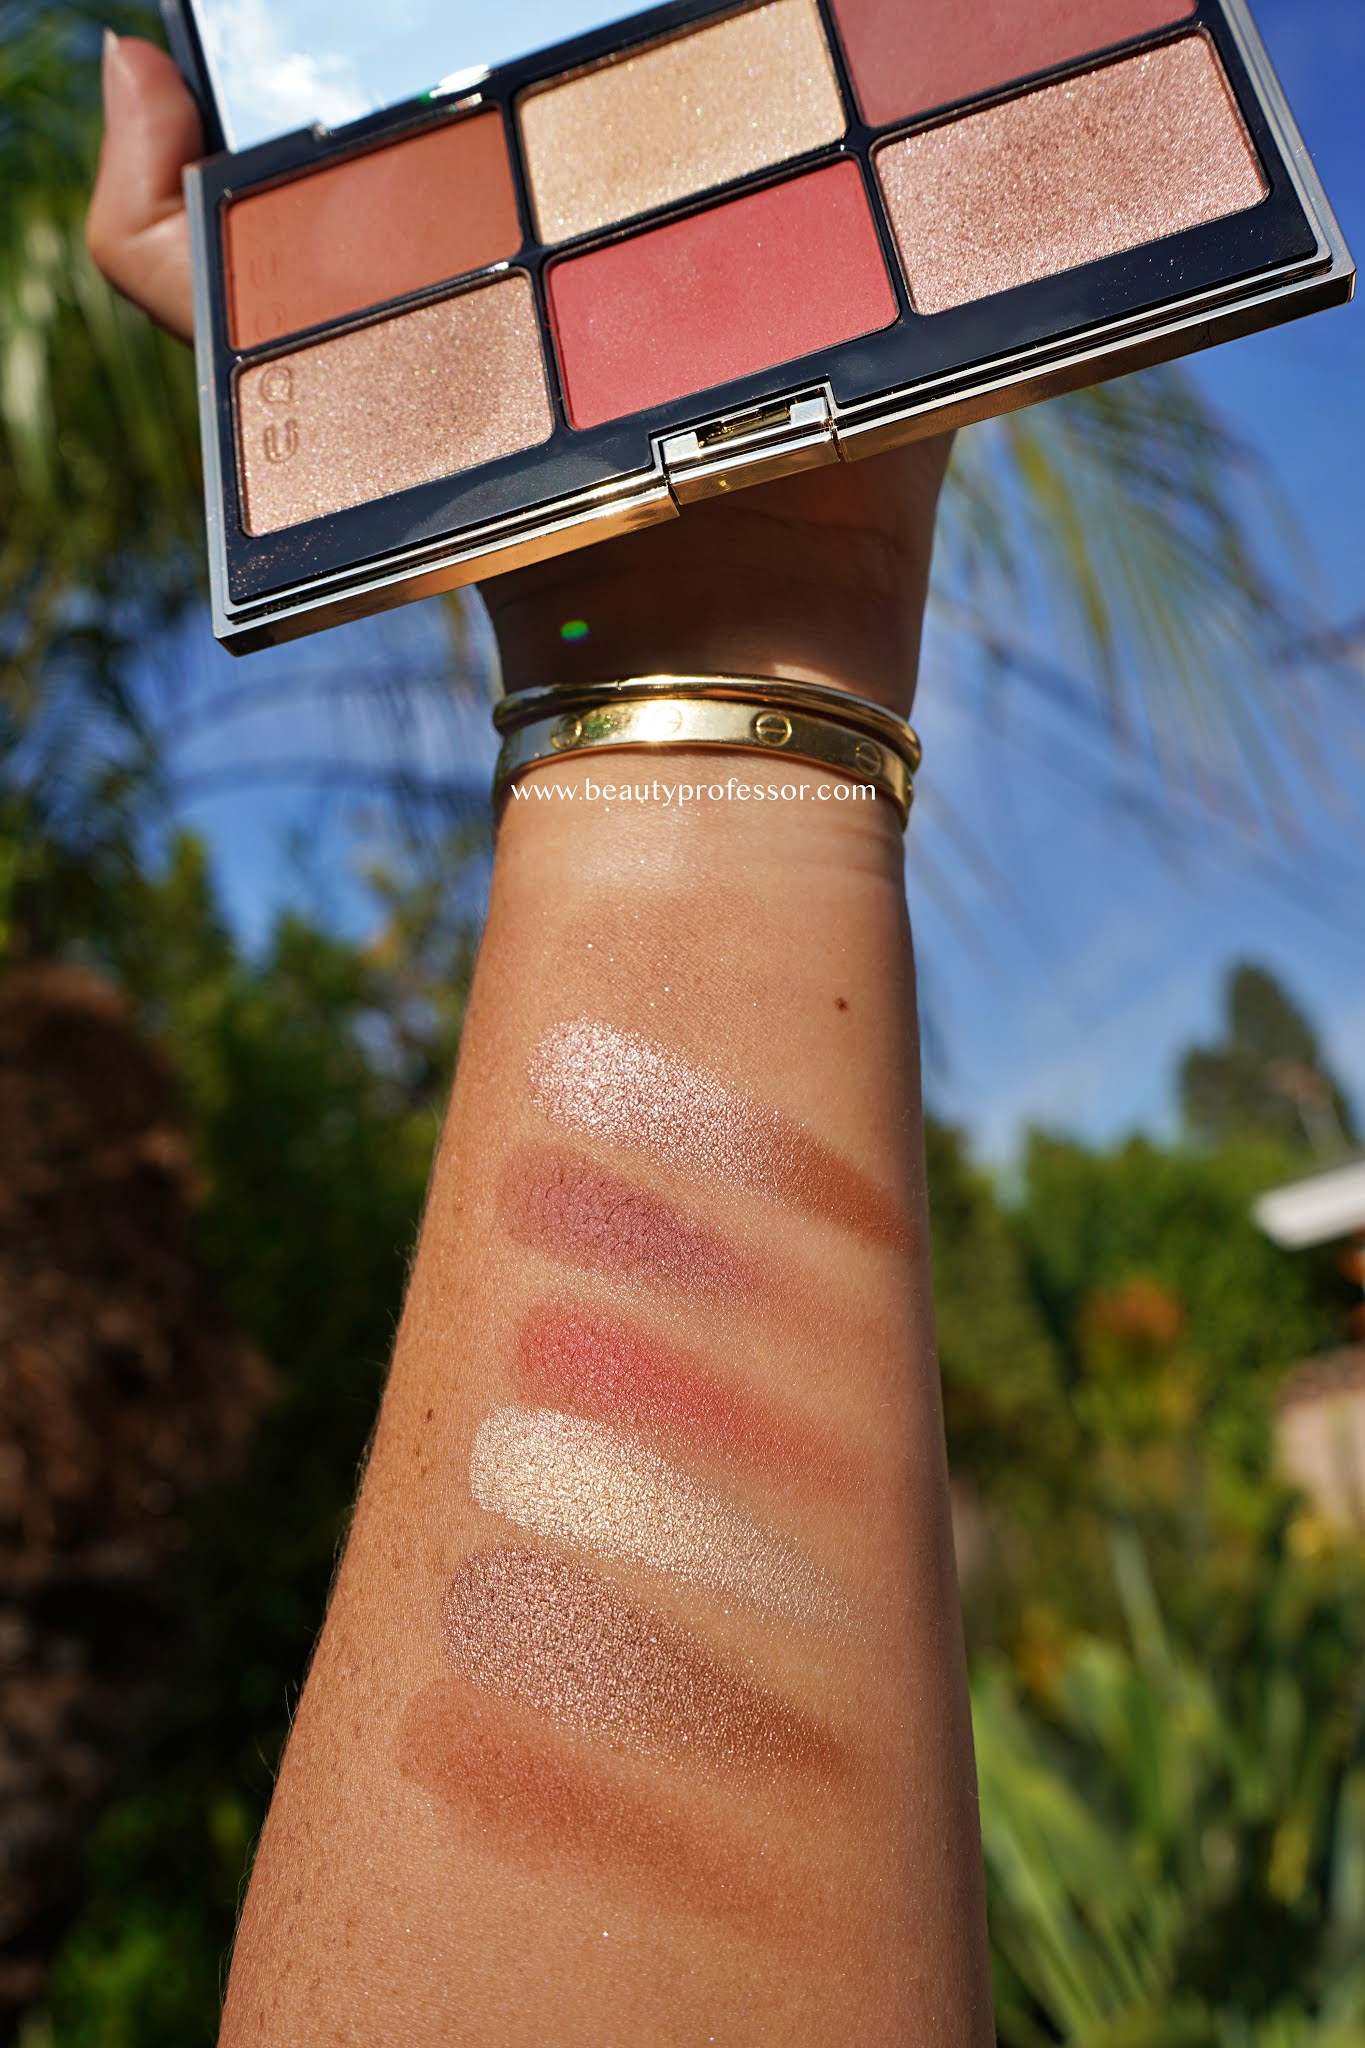 eyeshadow SUQQU and Lip Color Galore swatches